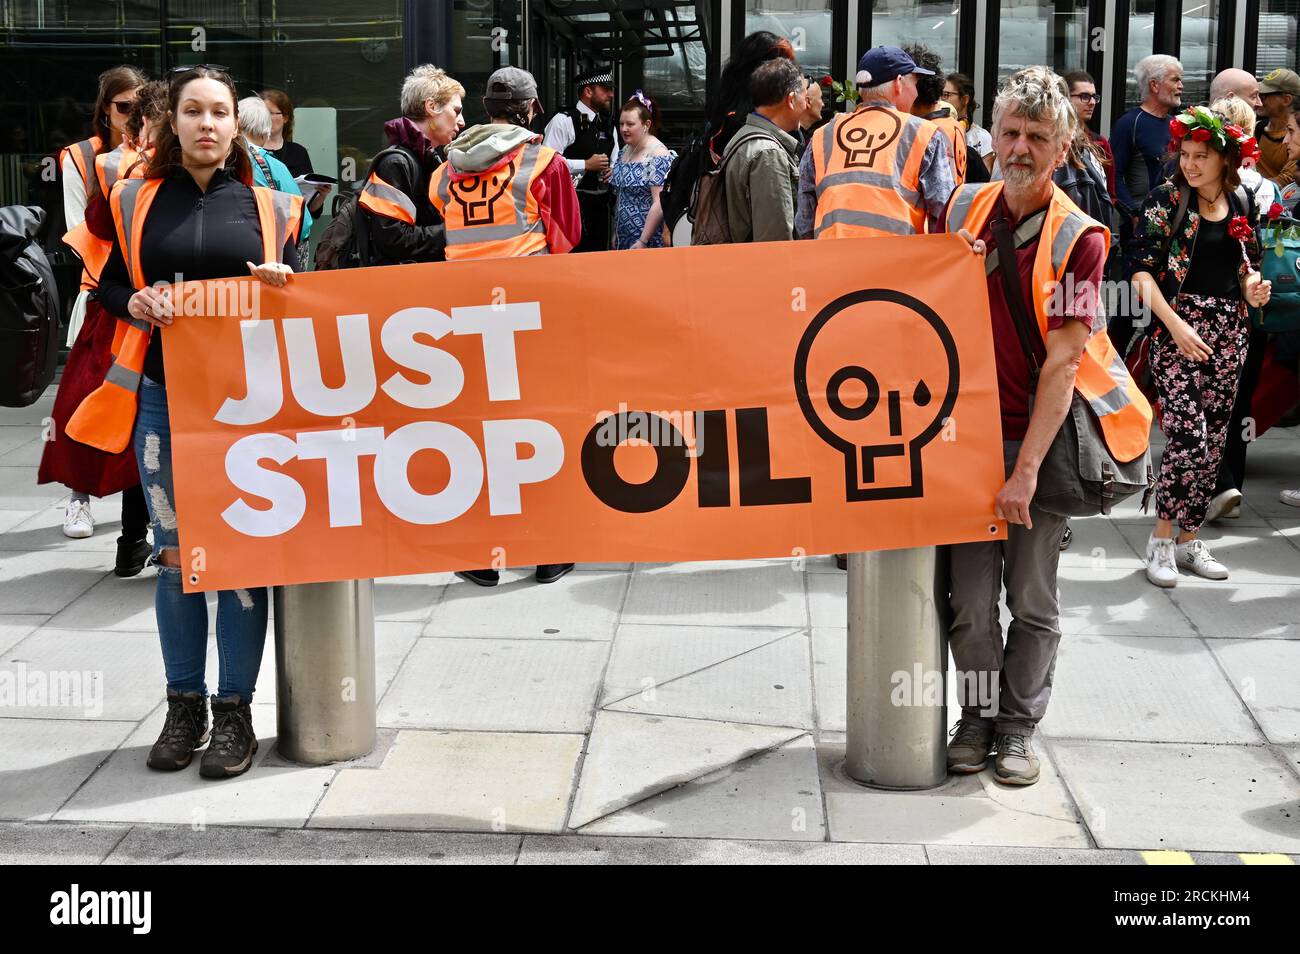 London, UK. Just Stop Oil Activists. Stop Rosebank Protest. No New Oil and Gas. A coalition of environmental groups including Extinction Rebellion and Just Stop Oil, demonstrated together to fight against the opening of Rosebank, the biggest undeveloped oil field in the North Sea by the Norwegian oil giant Equinor. Credit: michael melia/Alamy Live News Stock Photo